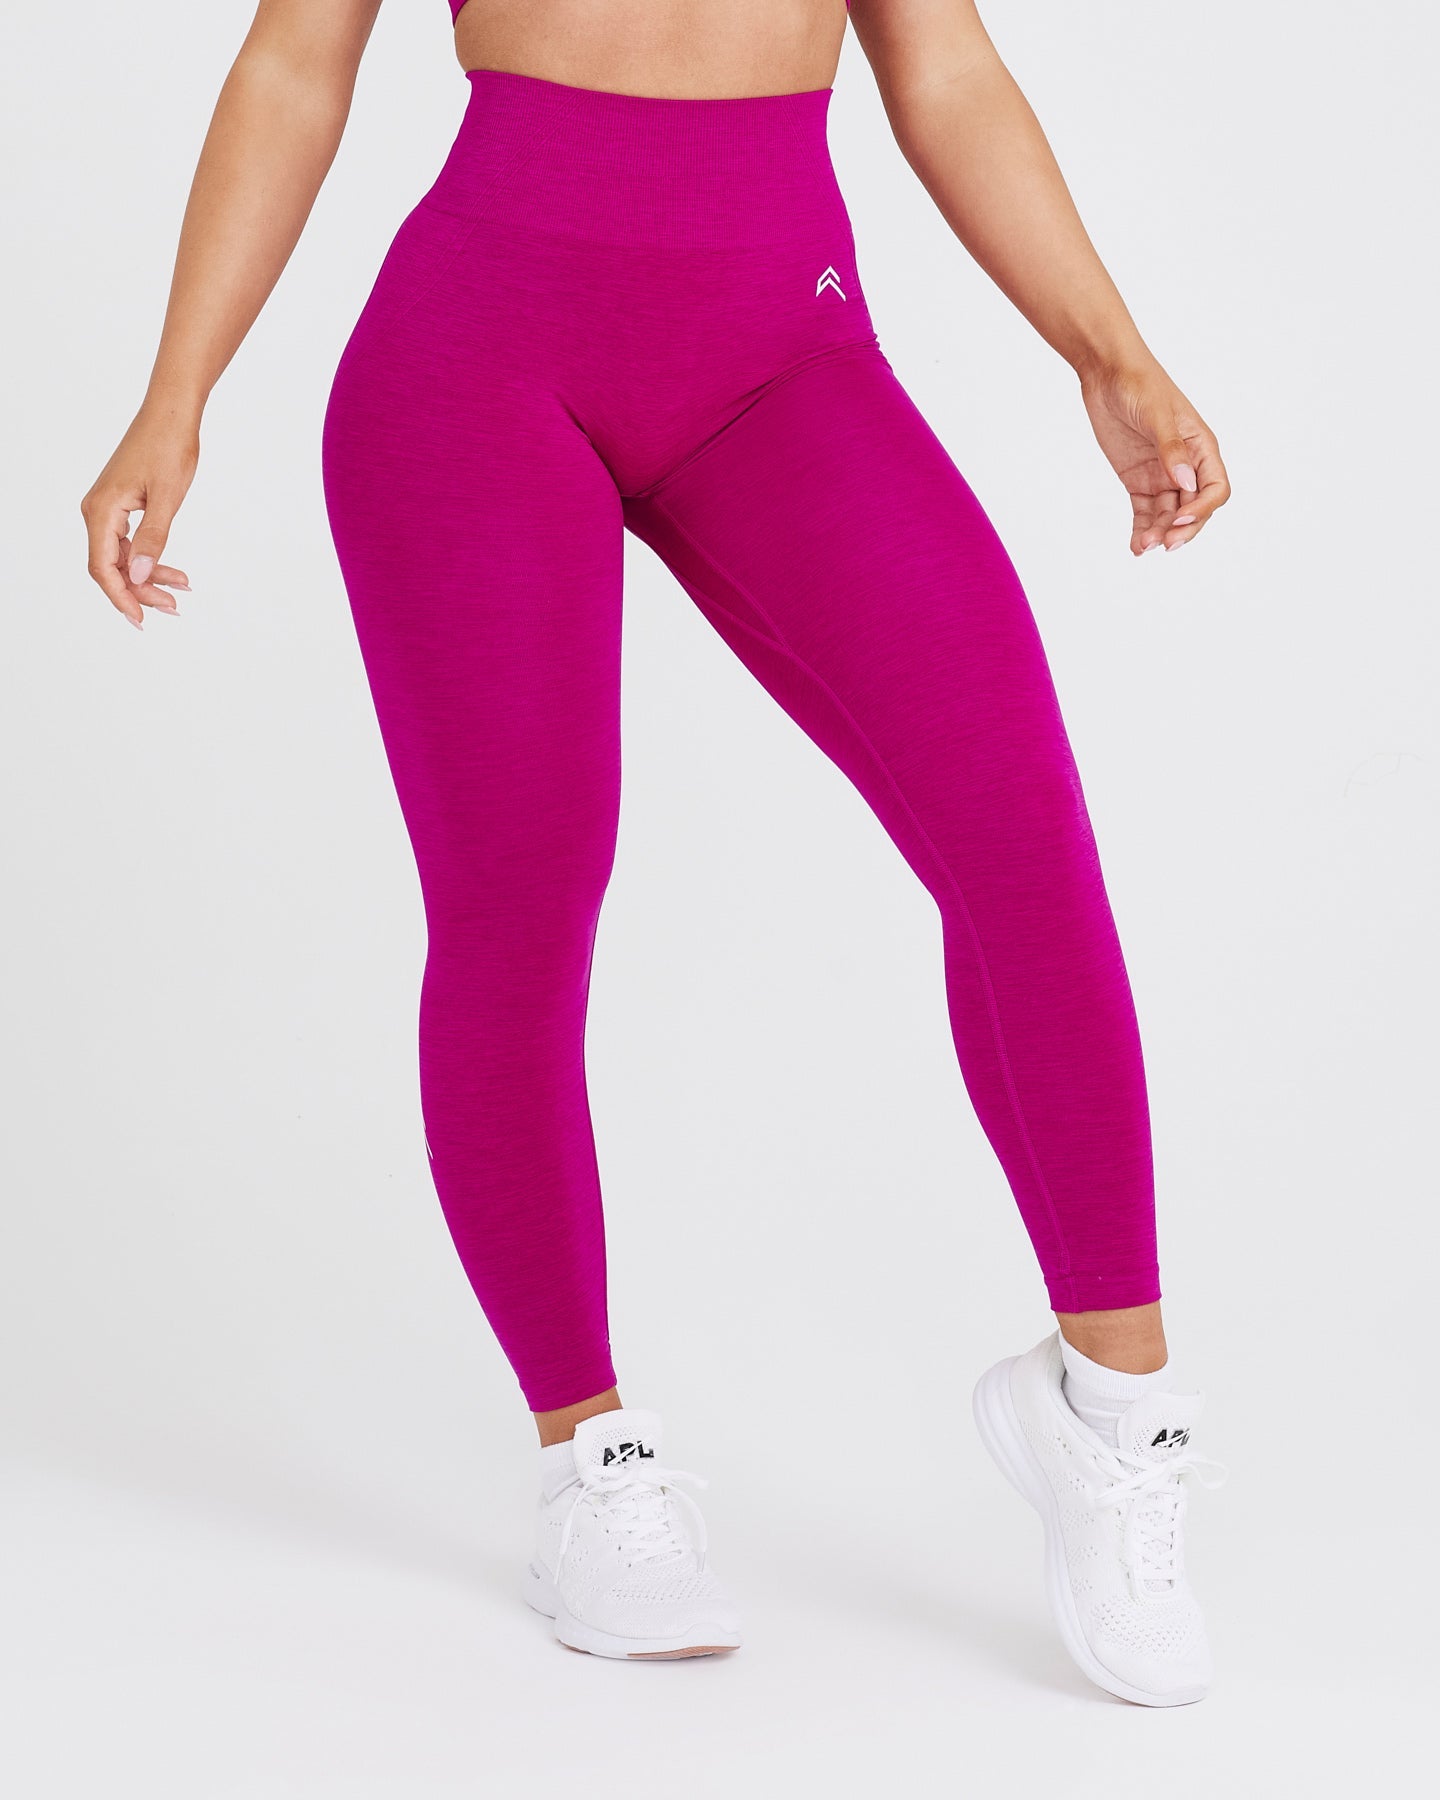 SEXY PINK ATHLETIC LEGGINGS FOR WOMEN